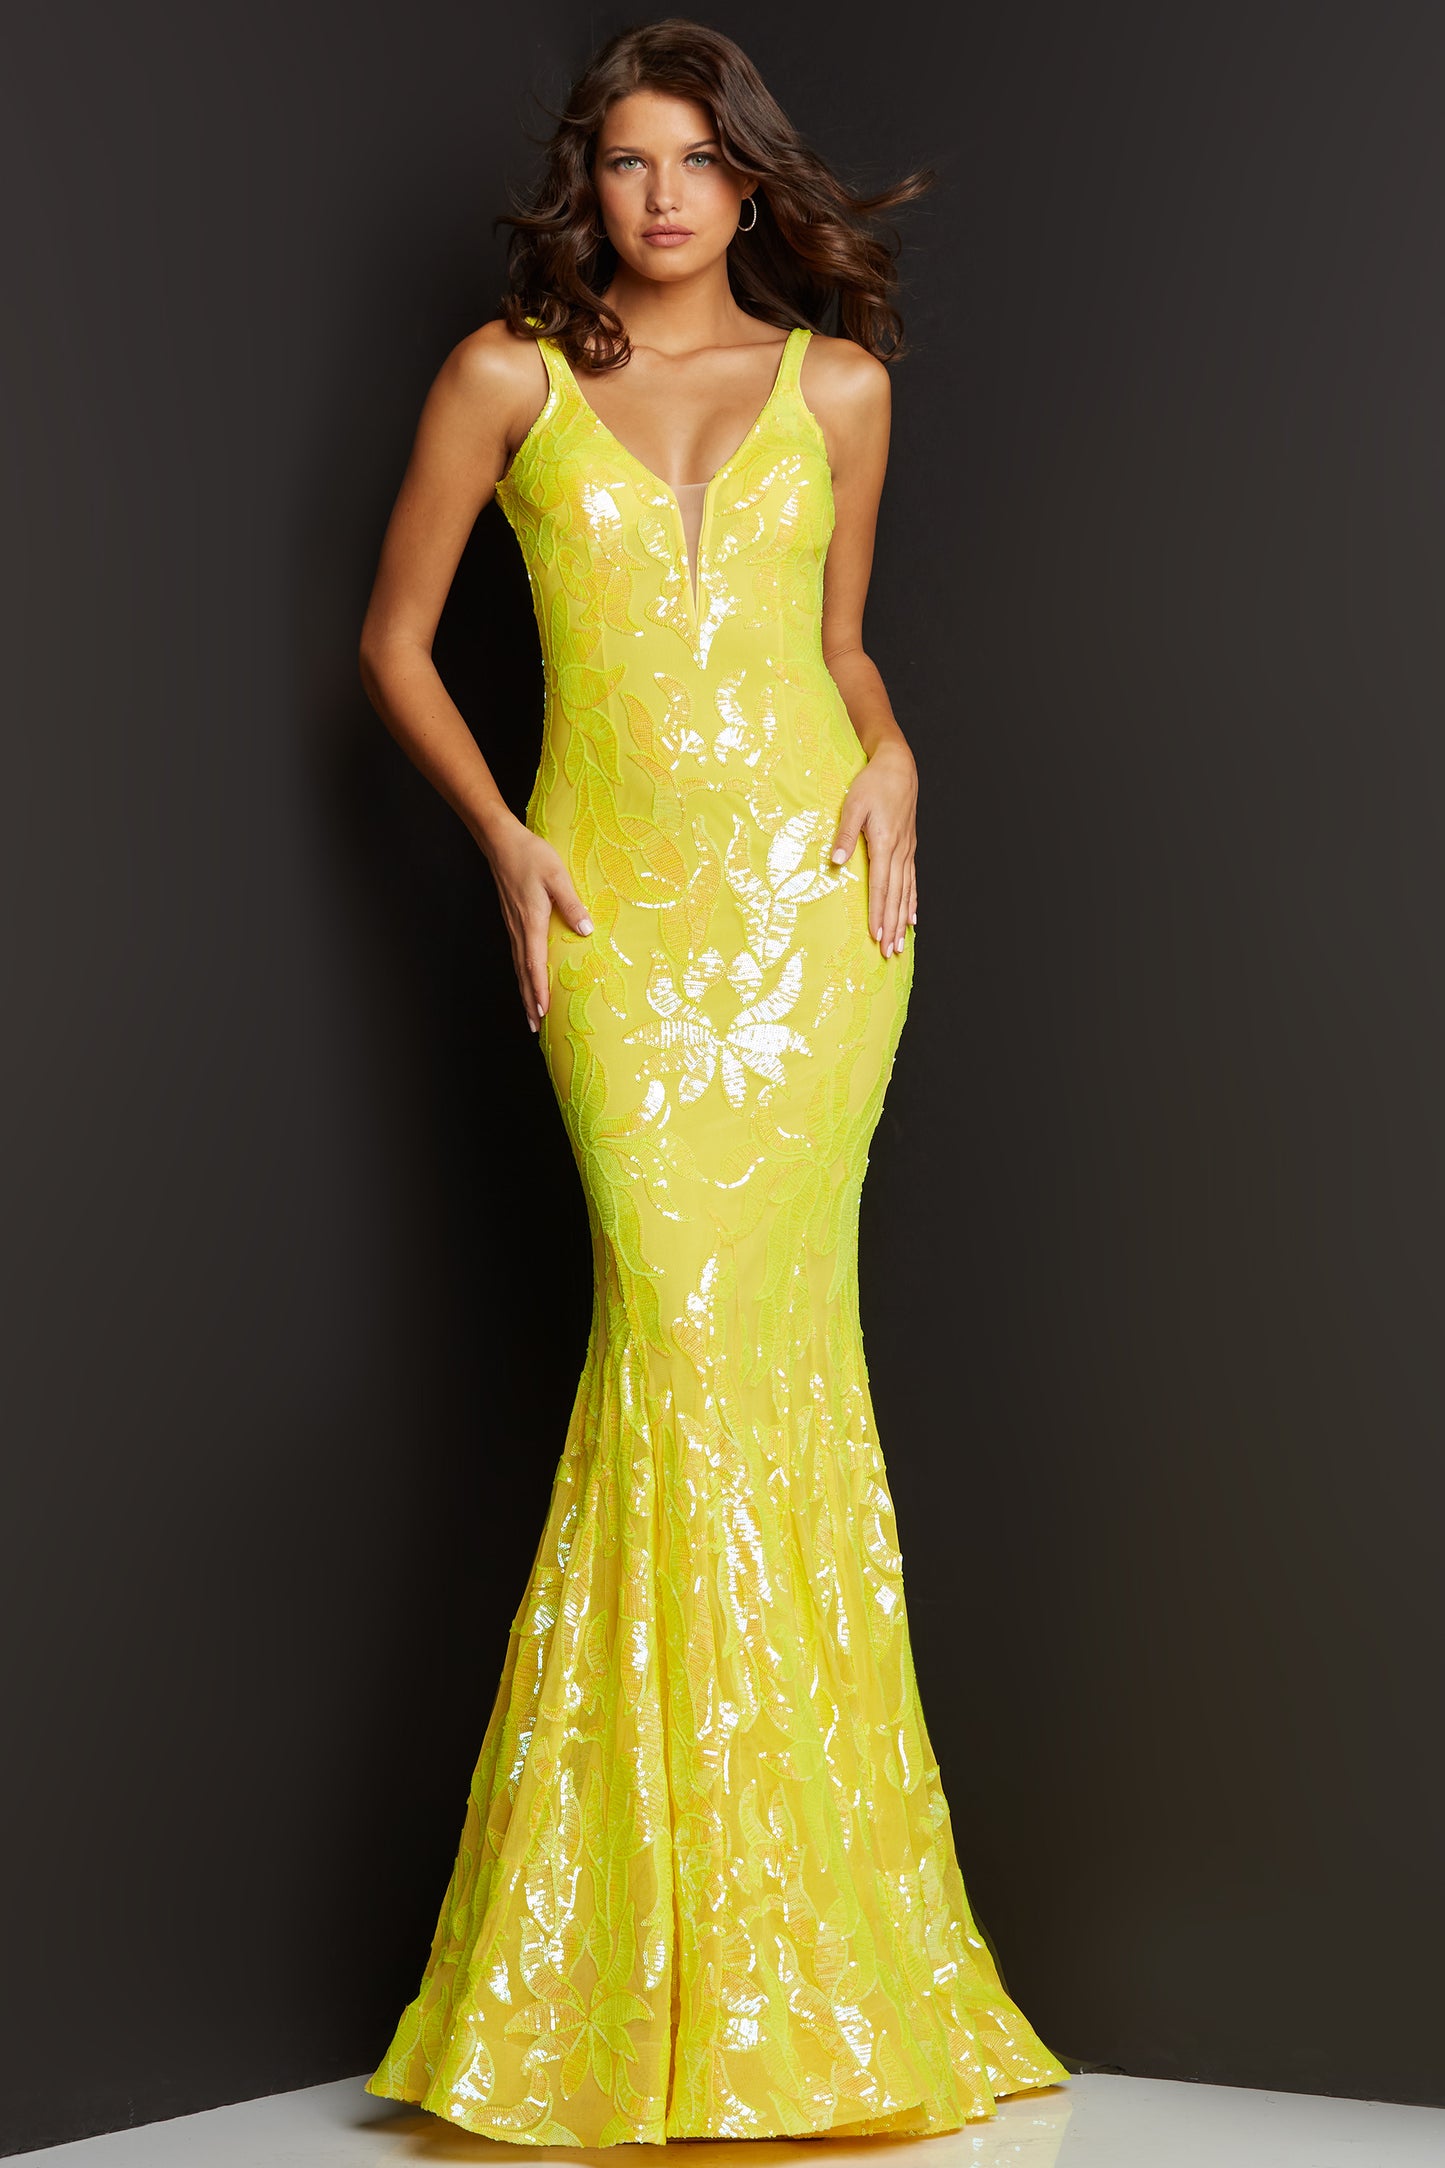 Jovani-3263-YELLOW-prom-dress-front-v-neckline-sequins-long-v-backJovani 3263 is a long Fitted Mermaid Prom Dress with a damask print sequin embellished pattern. Plunging V Neckline and open V Back. Lush Trumpet Skirt is great for the stage in this formal evening gown & Pageant Dress. wedding dress  Available Sizes: 00-24  Available Colors: BLACK/GUNMETAL, BLACK/ROSE, GREEN/MULTI, HOT PINK, LIGHT BLUE, LIGHT PINK, NEON GREEN, ORANGE, YELLOW